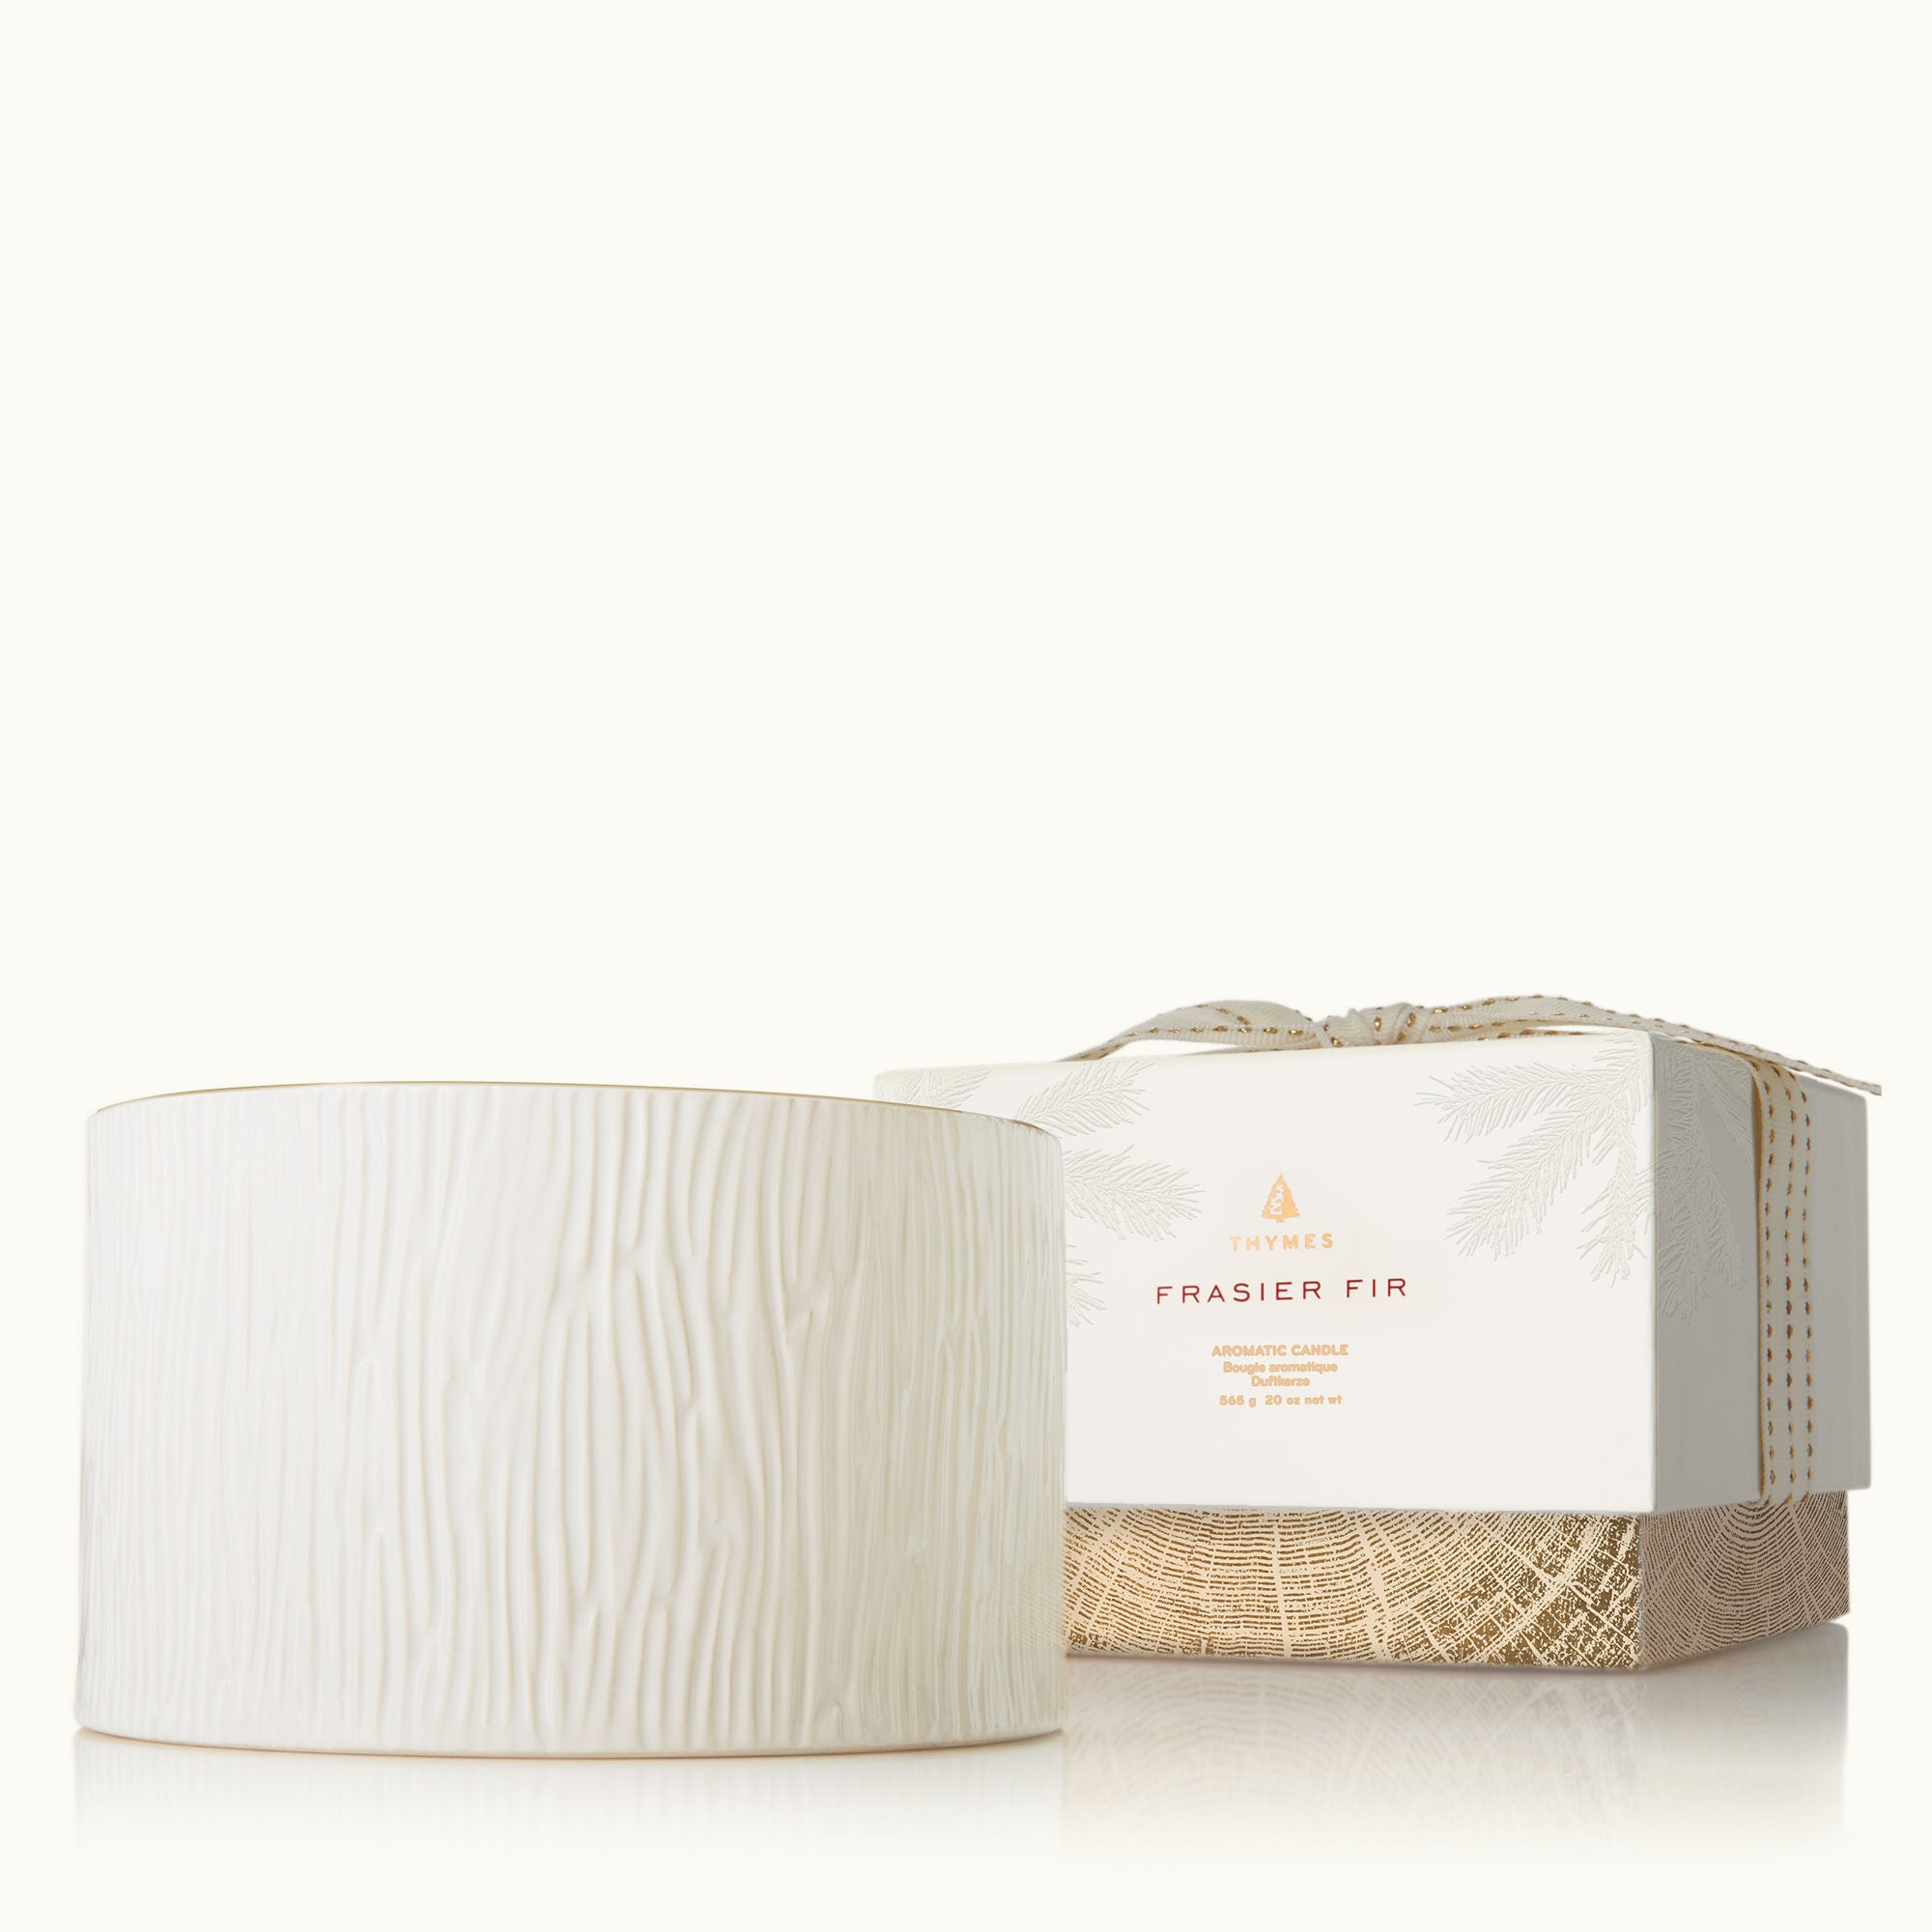 Thymes Frasier Fir Gilded Gold Poured Candle, 6.5 oz